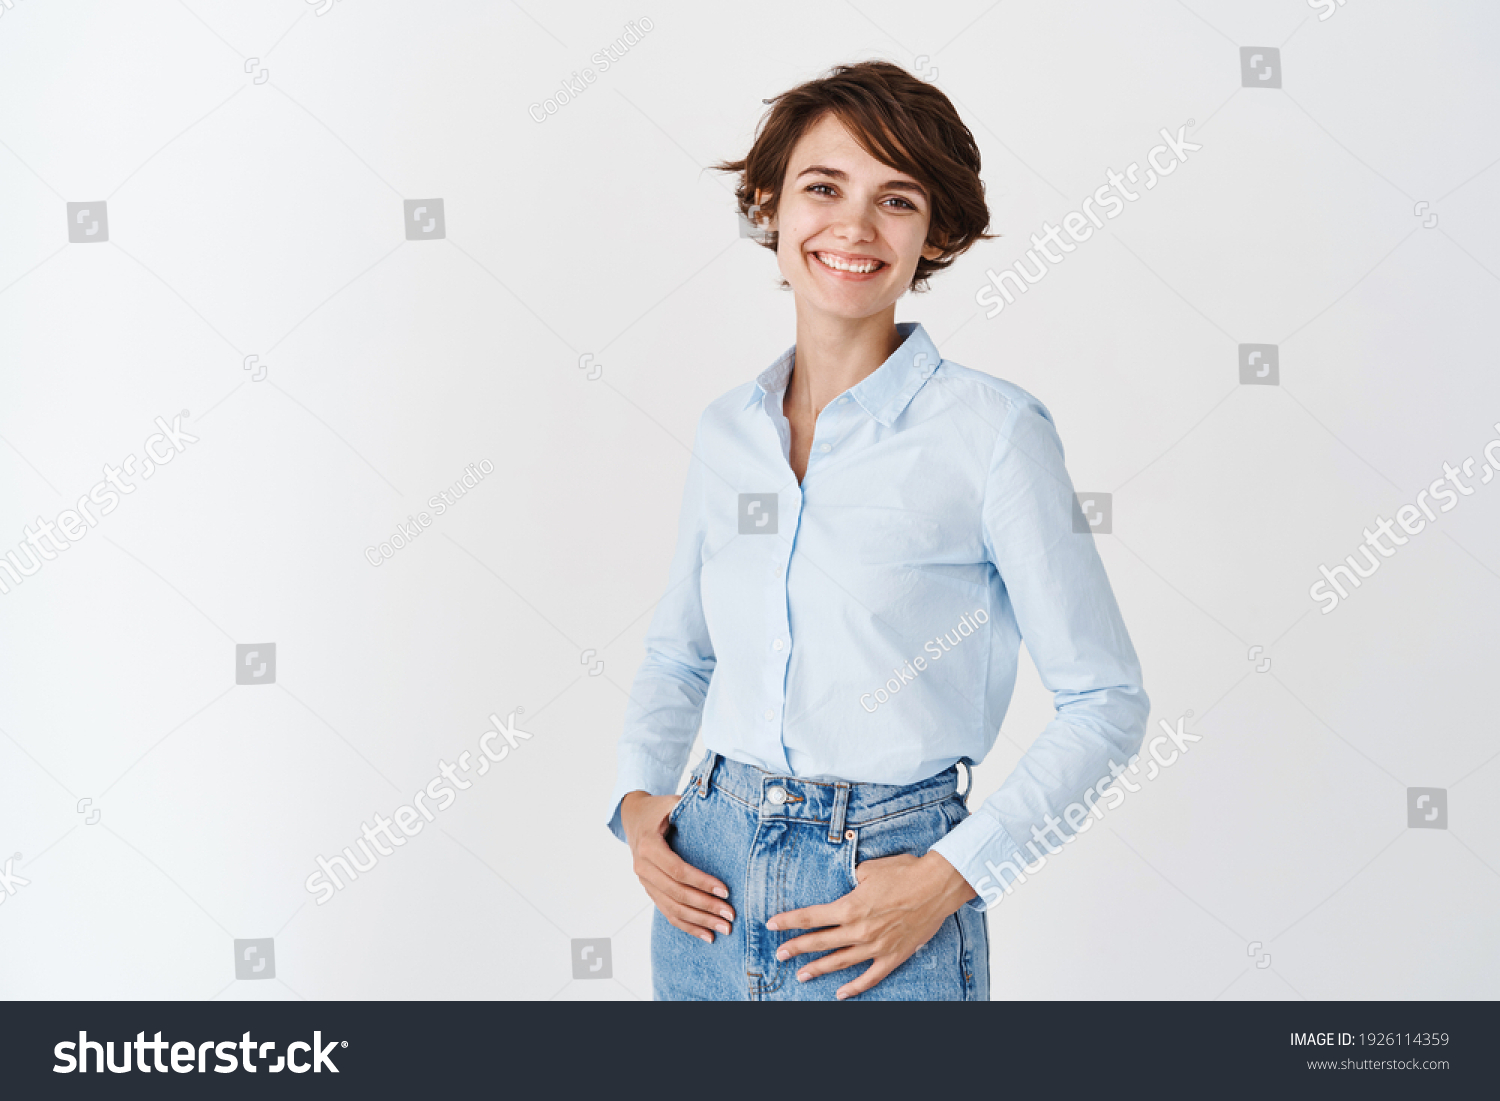 Young working woman in office clothing, smiling and looking at camera, standing on white background. Professional women concept. #1926114359